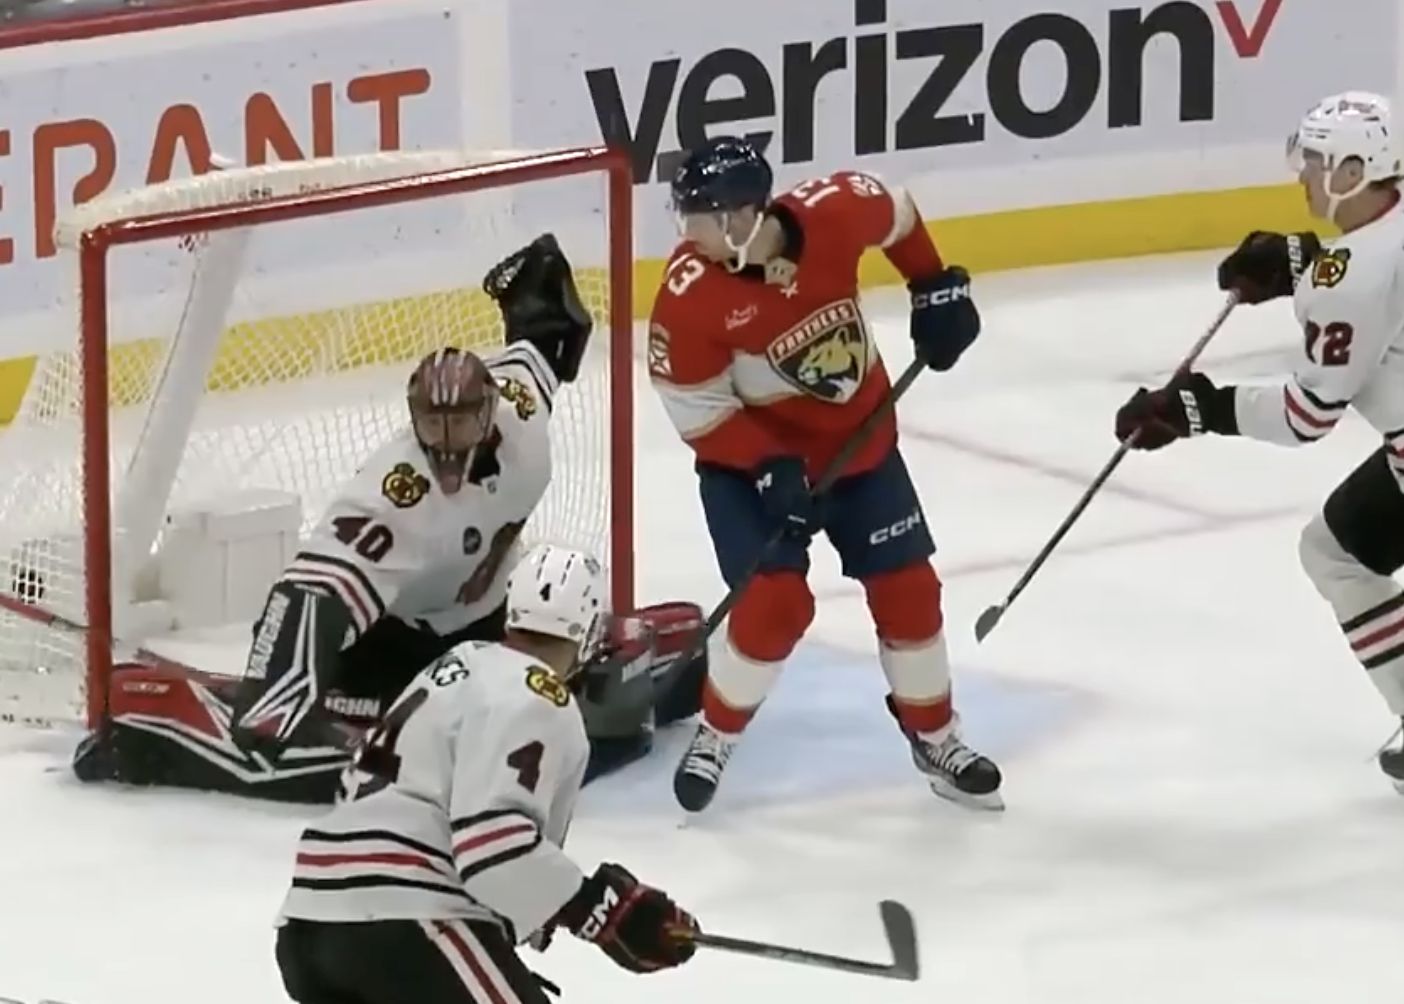 Takeaways from Panthers 4-3 win over Blackhawks